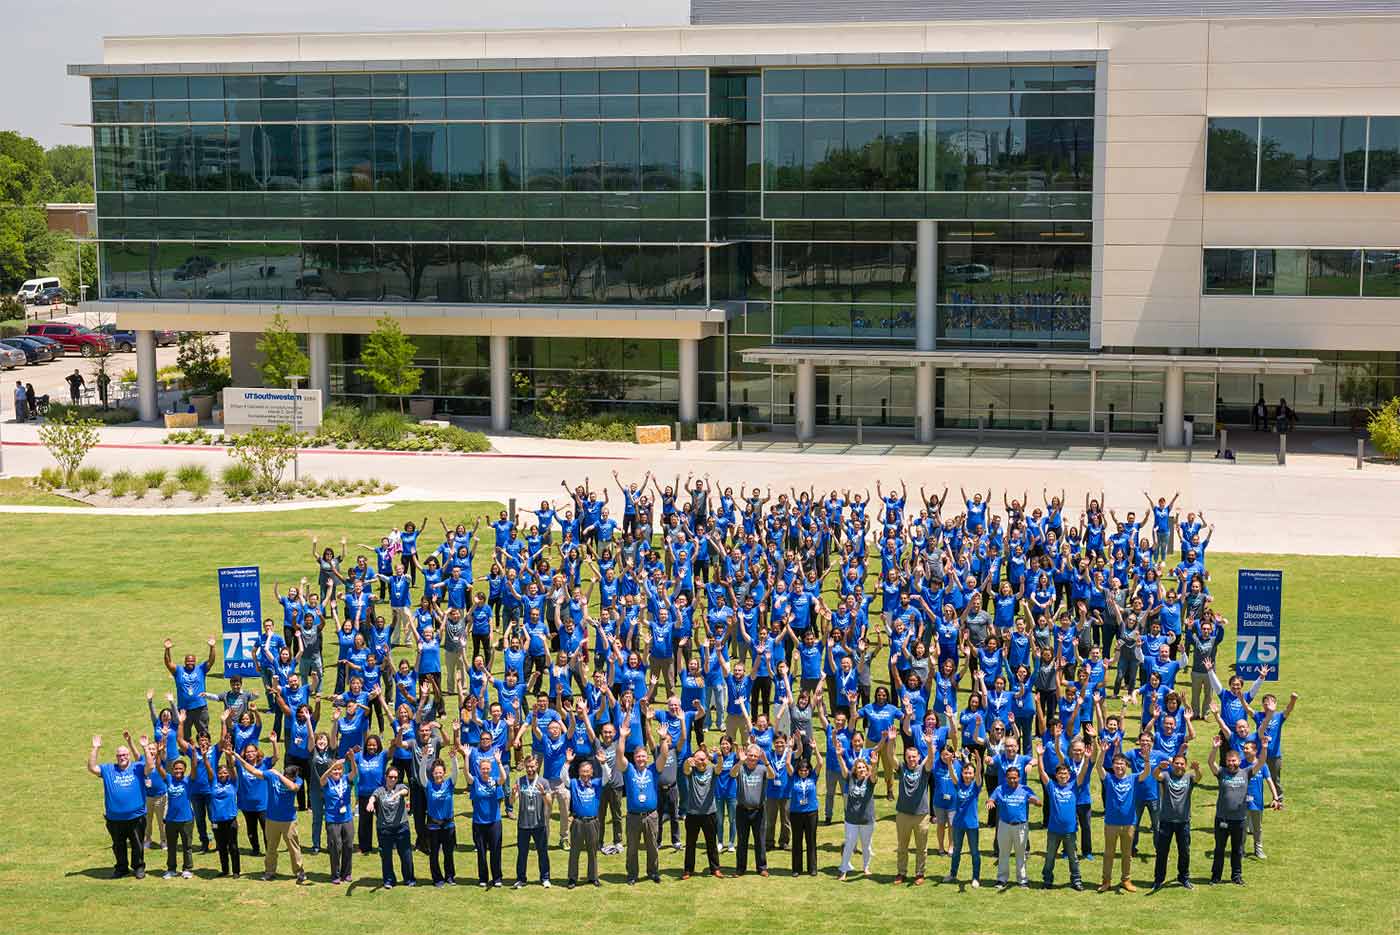 Large group of people outdoors wearing blue shirts